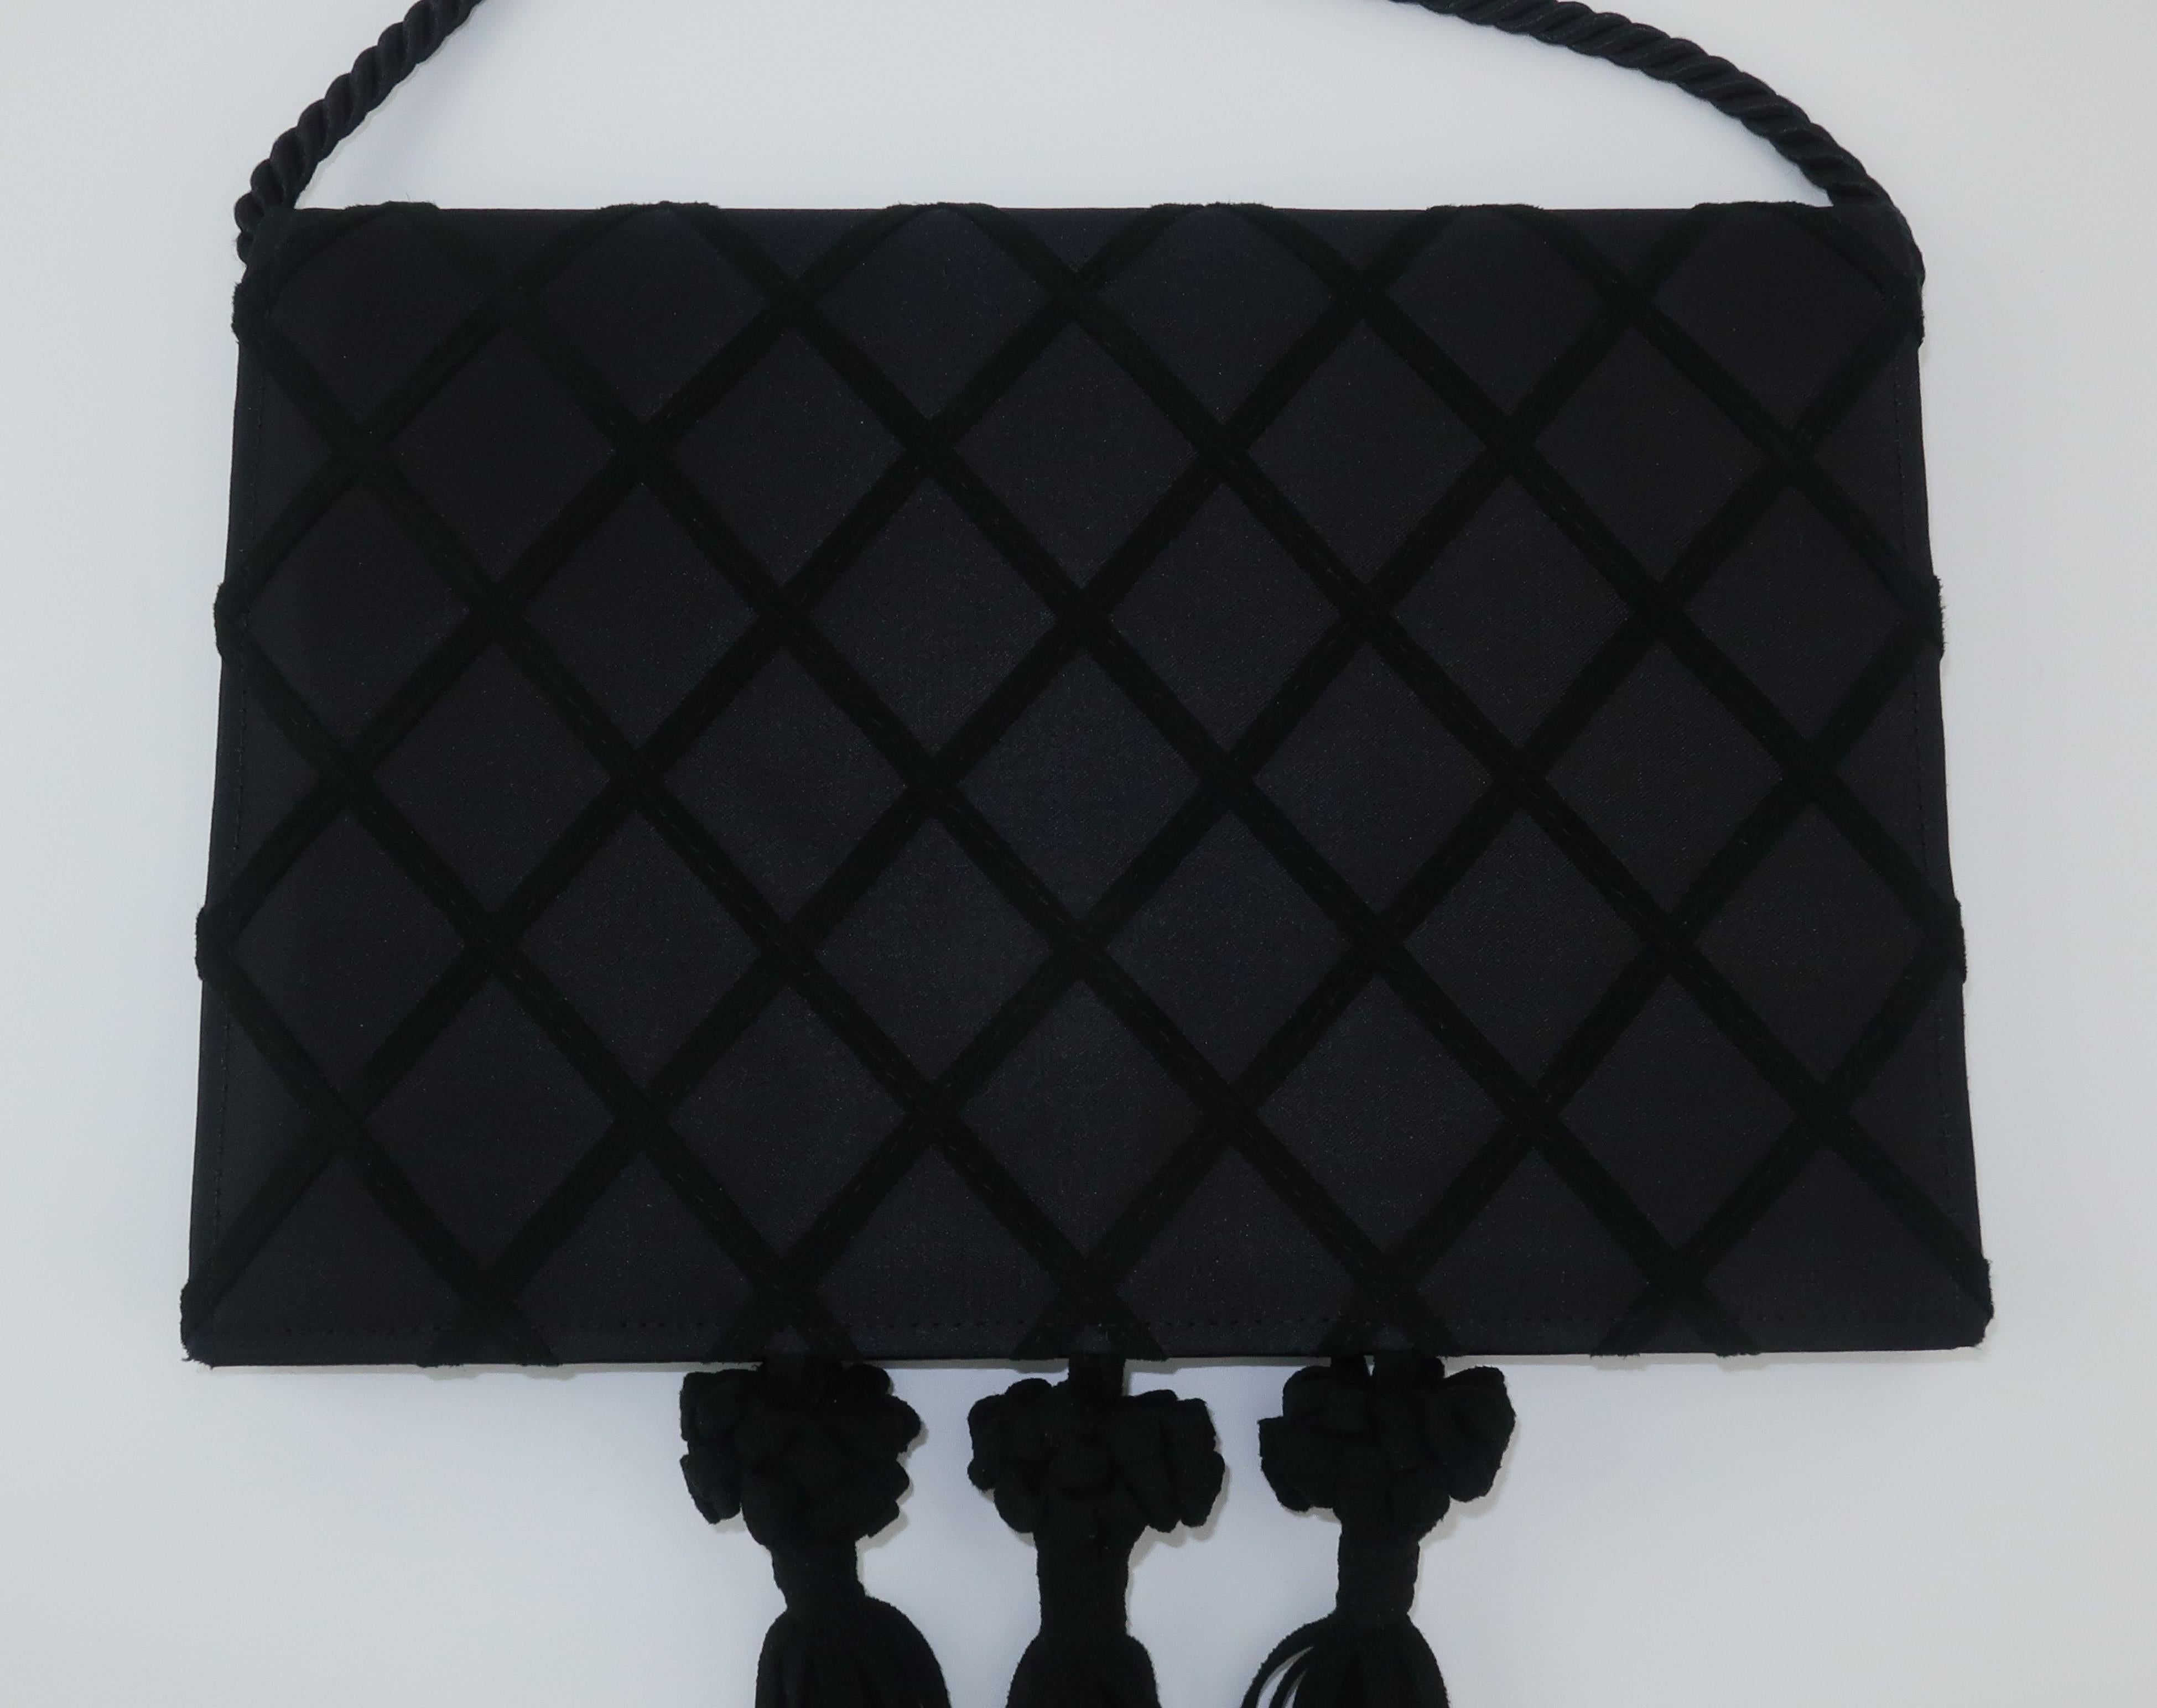 A black satin envelope style evening handbag from Victor Costa with an ultra suede lattice pattern and dangling tassels.  it features a black silk ‘rope’ drop-in shoulder strap and a snap front closure which opens to a roomy interior.  Truly a